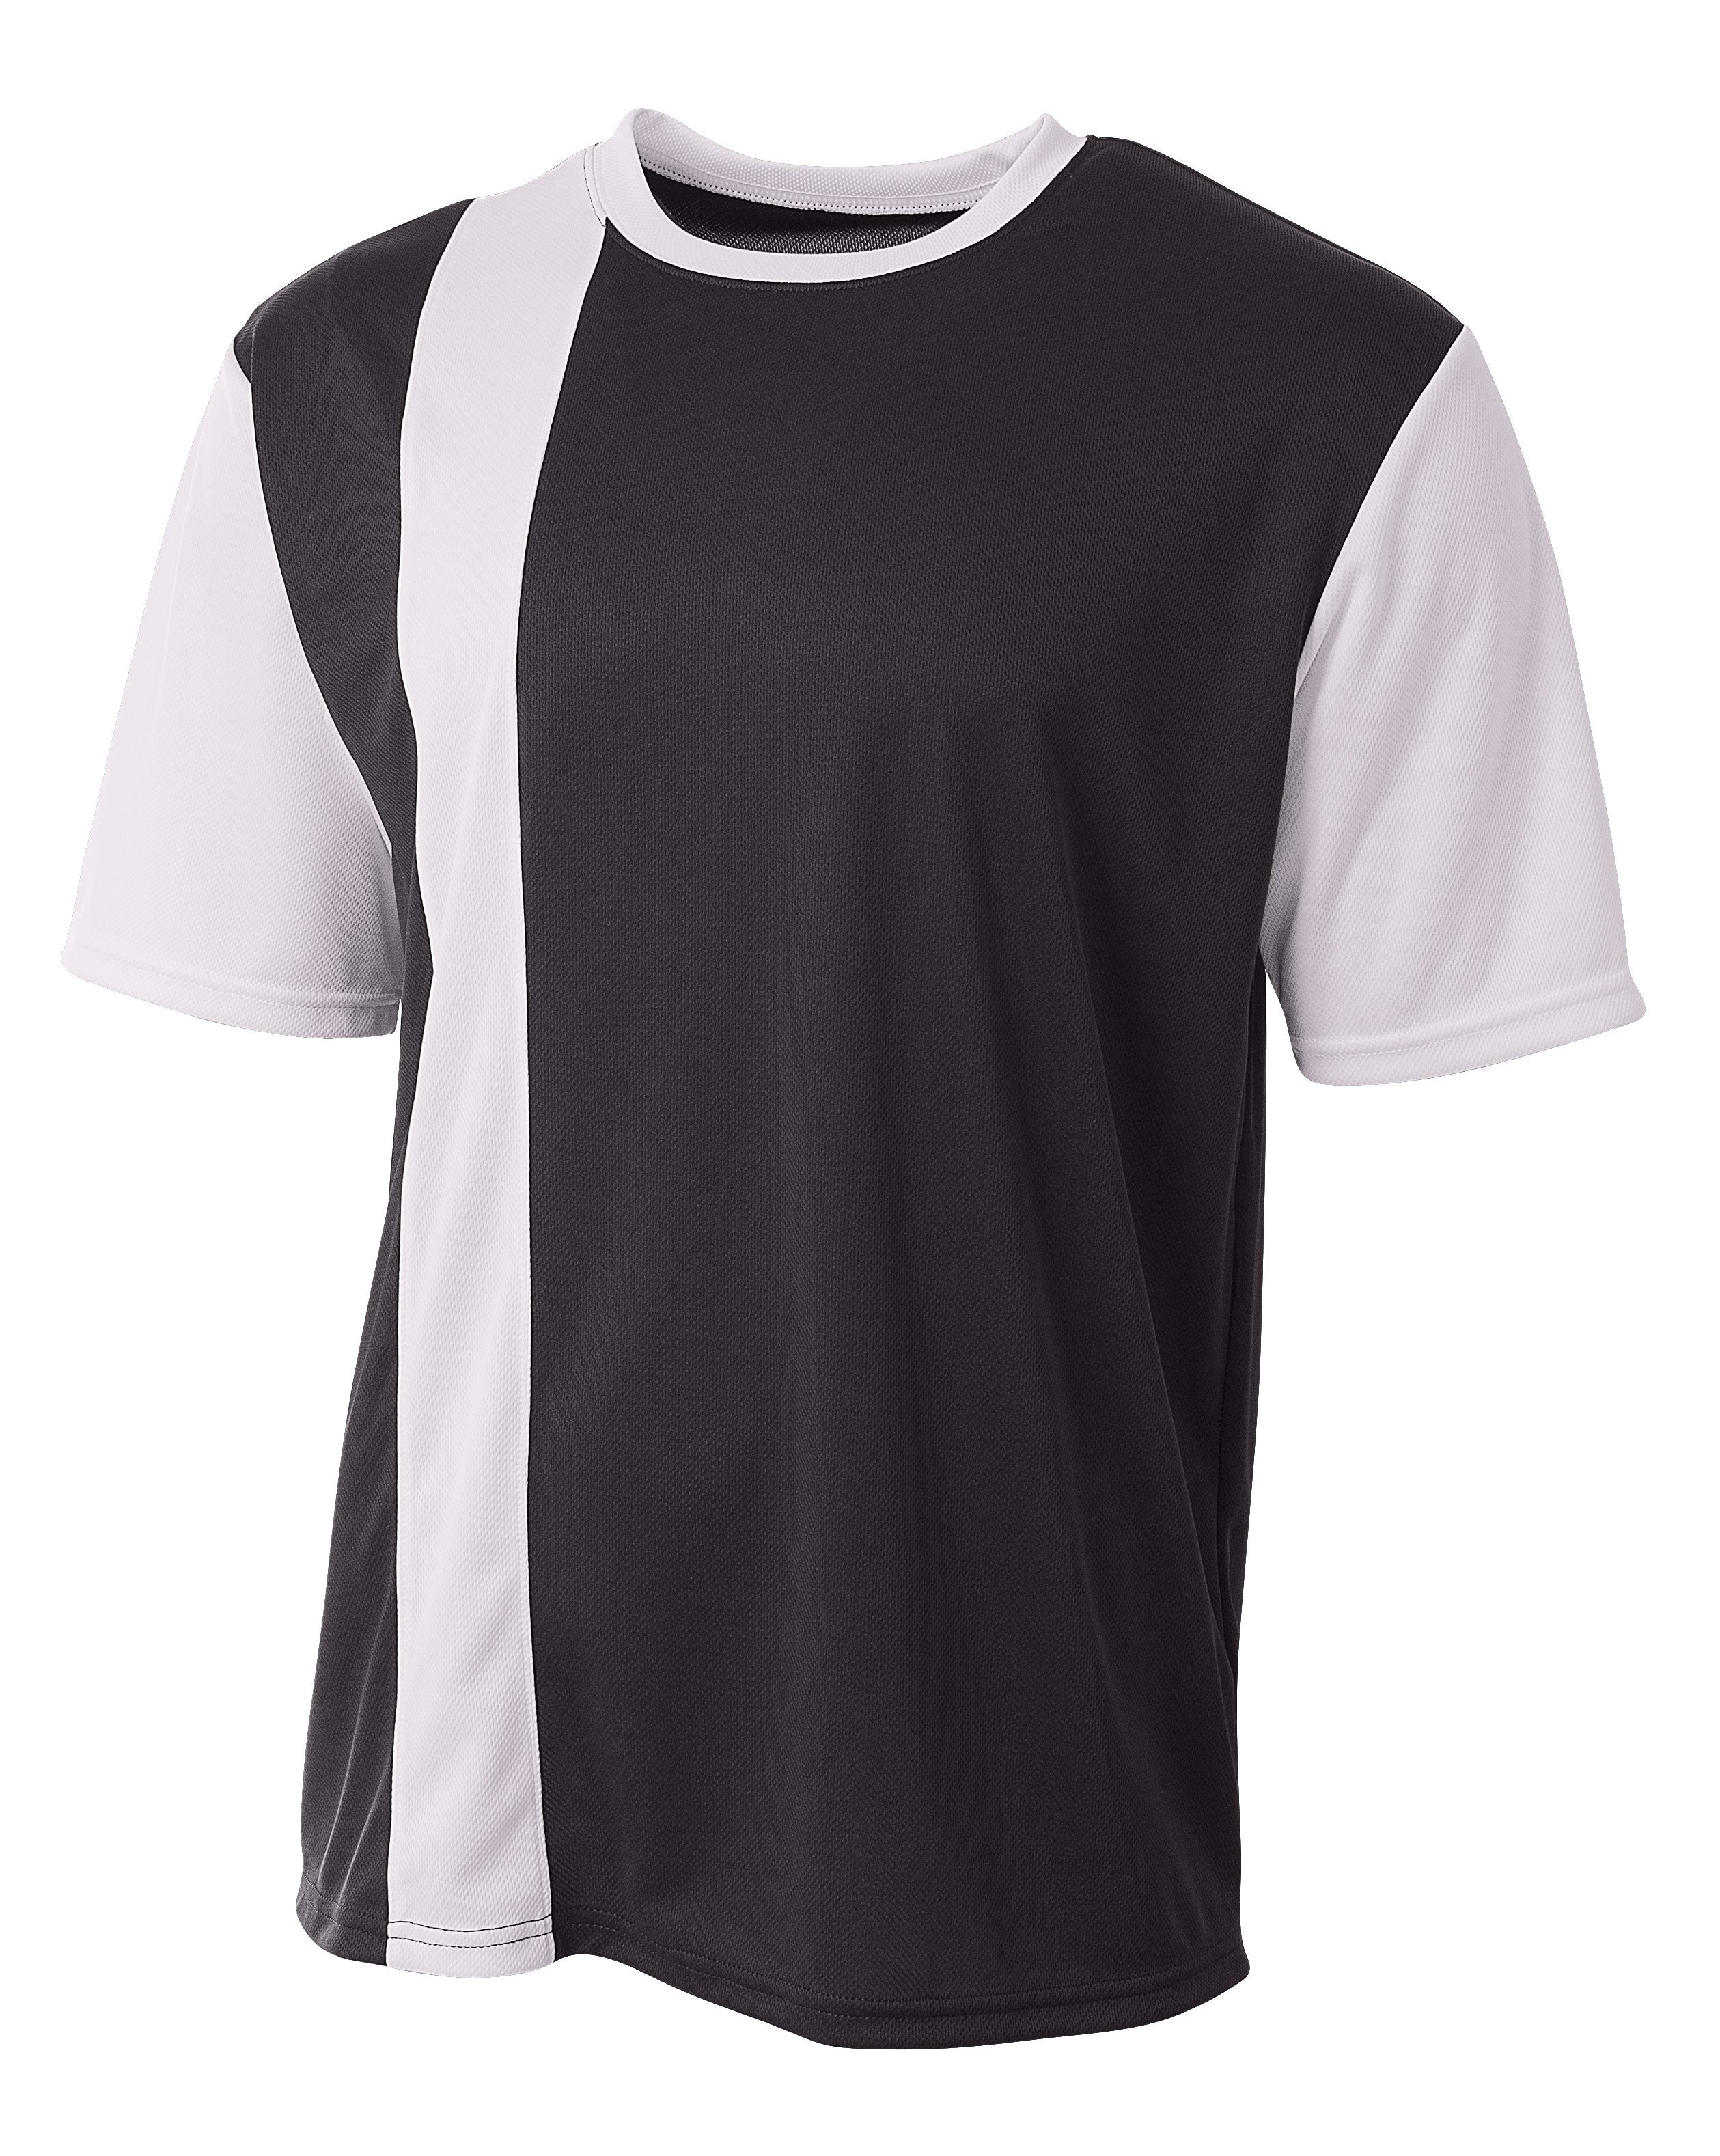 A4 Legend Youth Soccer Jersey - Youth Sports Products